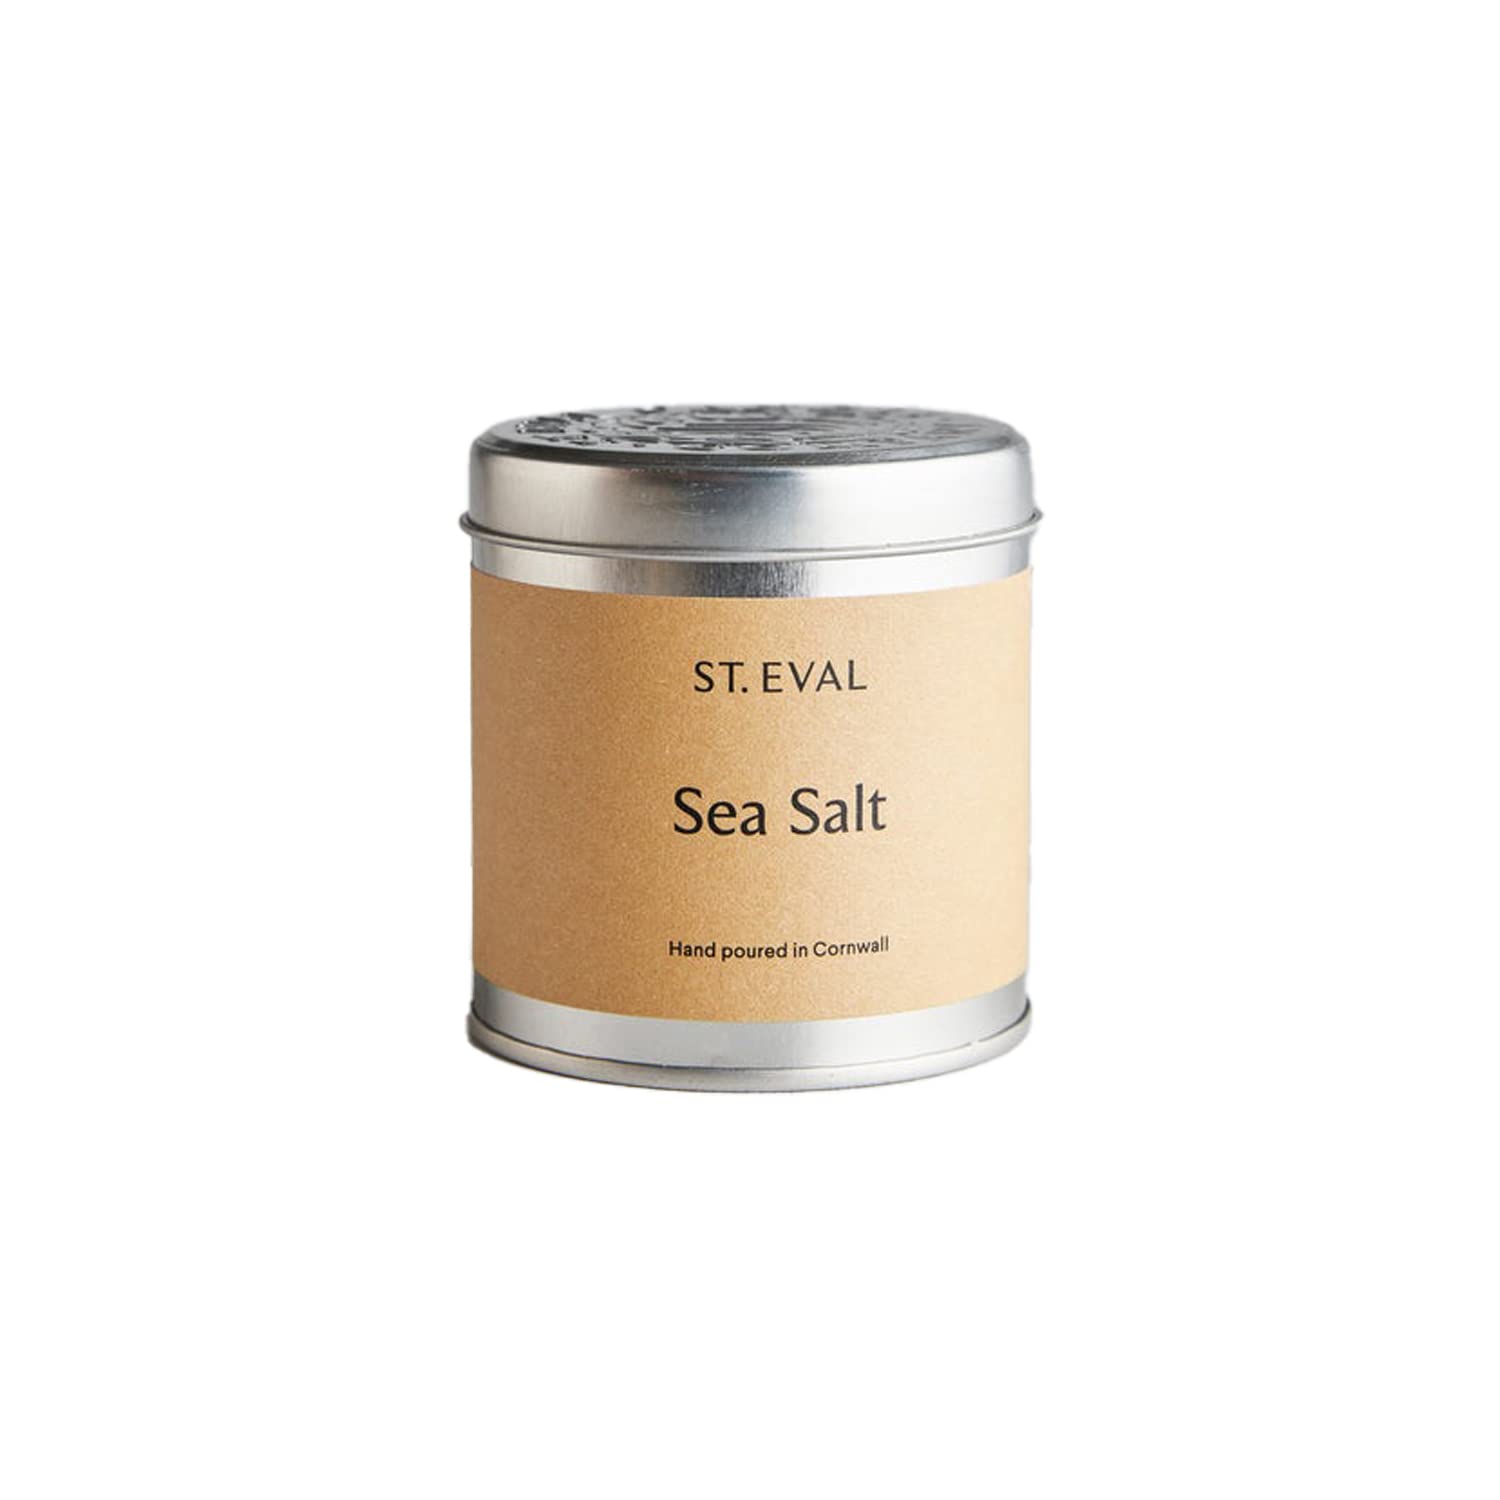 St Eval Sea Salt Scented Tin Candle - Wax - Refreshing Fragrance - A Unique Blend of Marine Scents with Salty Accords and Floral Notes on a Bed of Musk - Made in Cornwall